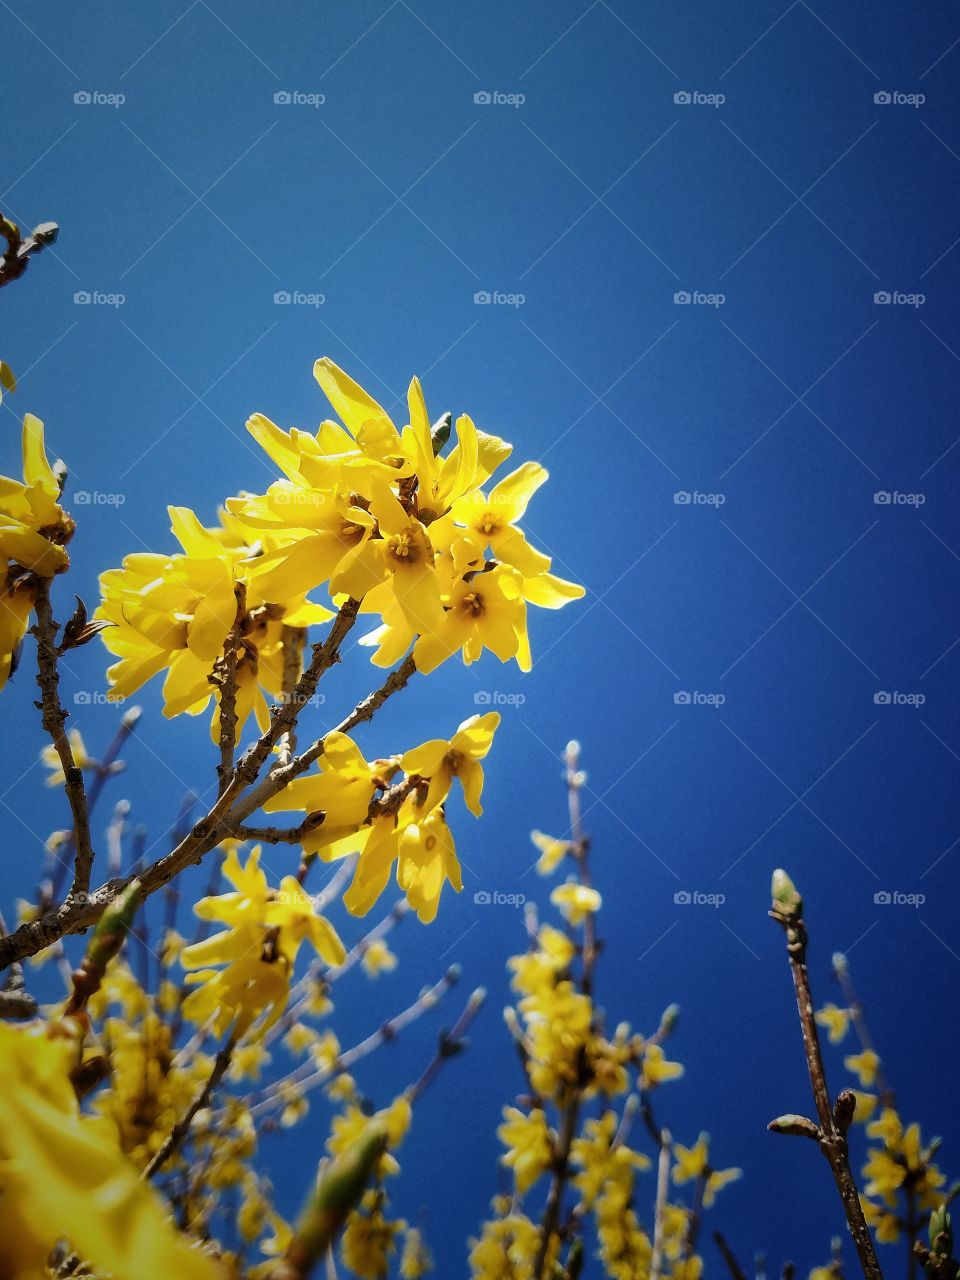 Low angle view of yellow flower